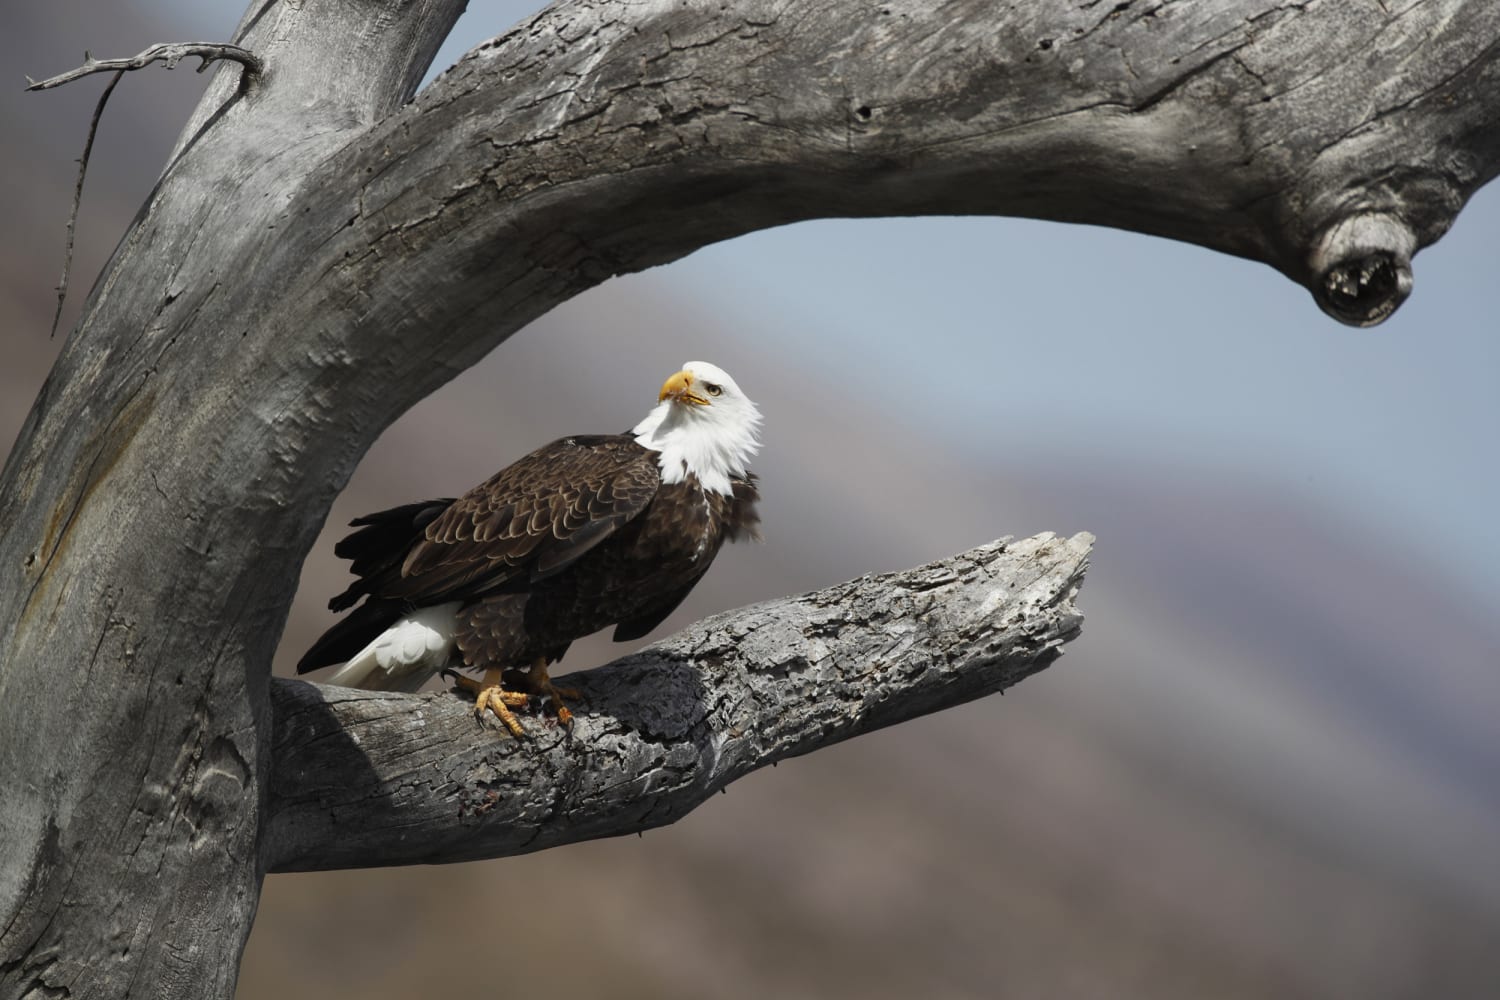 Bald eagle populations soar in lower 48 states, research finds